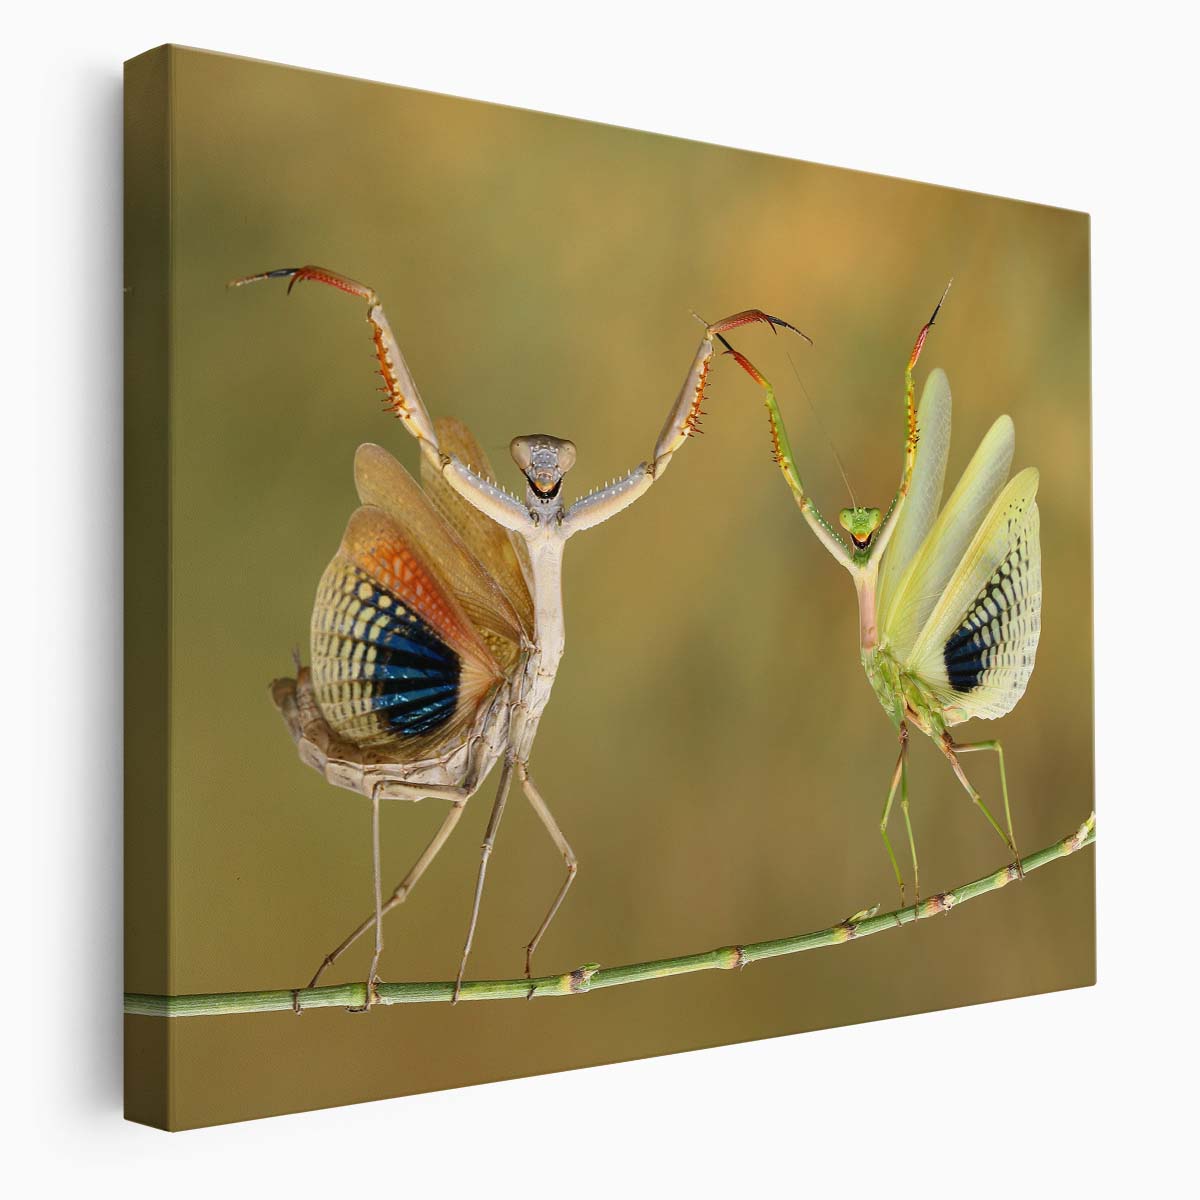 Joyful Ballet of Praying Mantises Duo Wall Art by Luxuriance Designs. Made in USA.